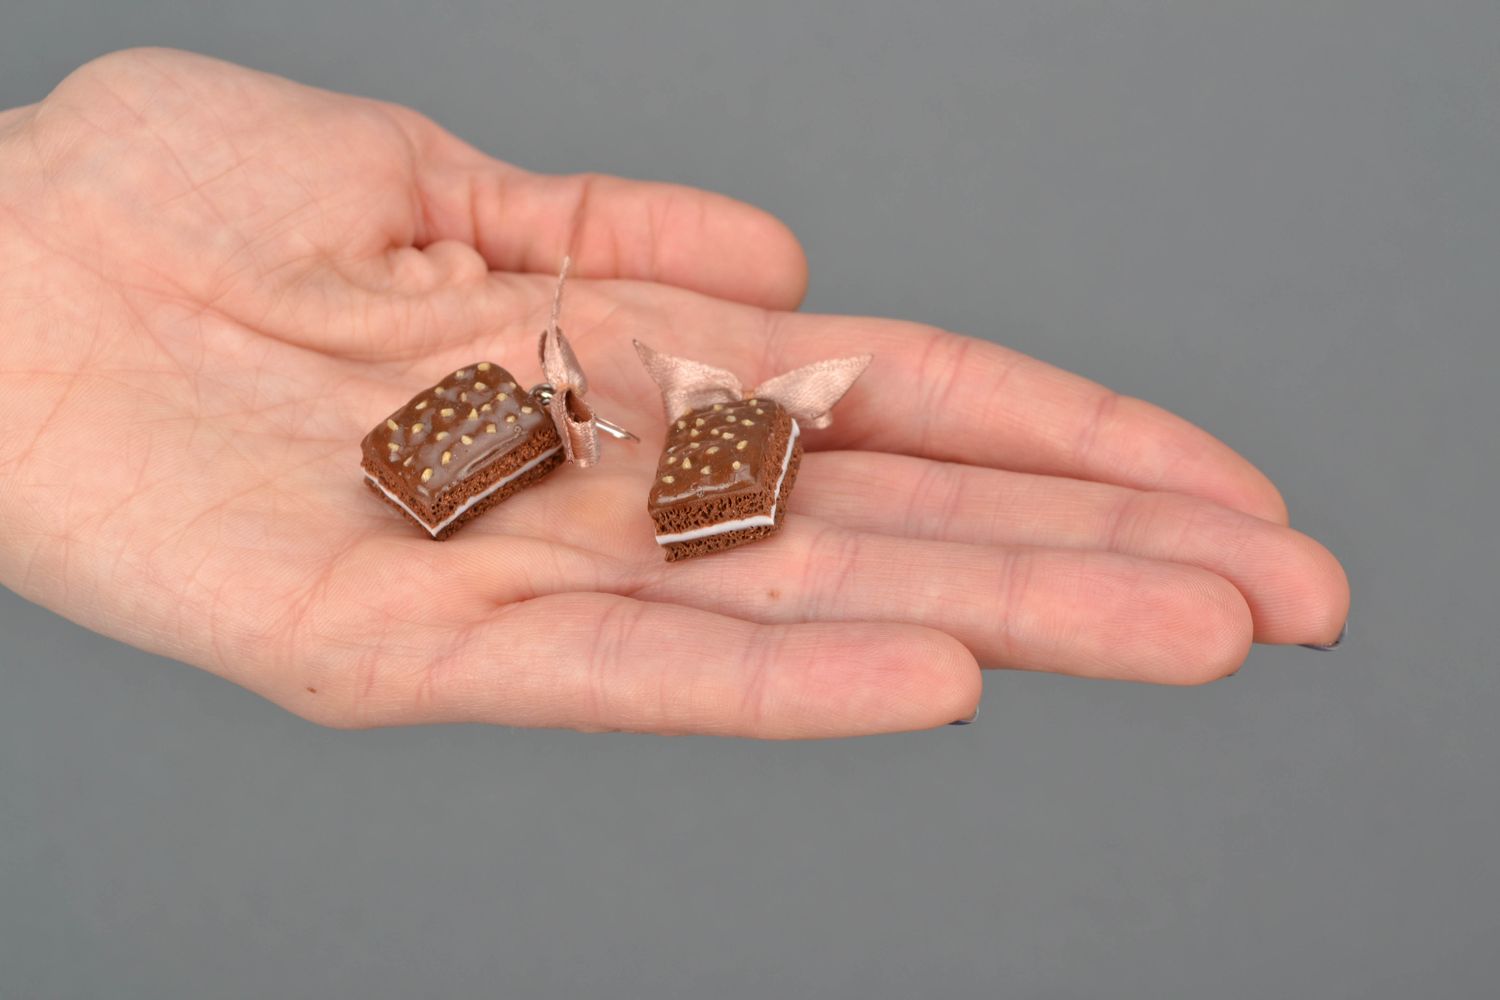 Polymer clay earrings in the shape of chocolate cakes photo 2